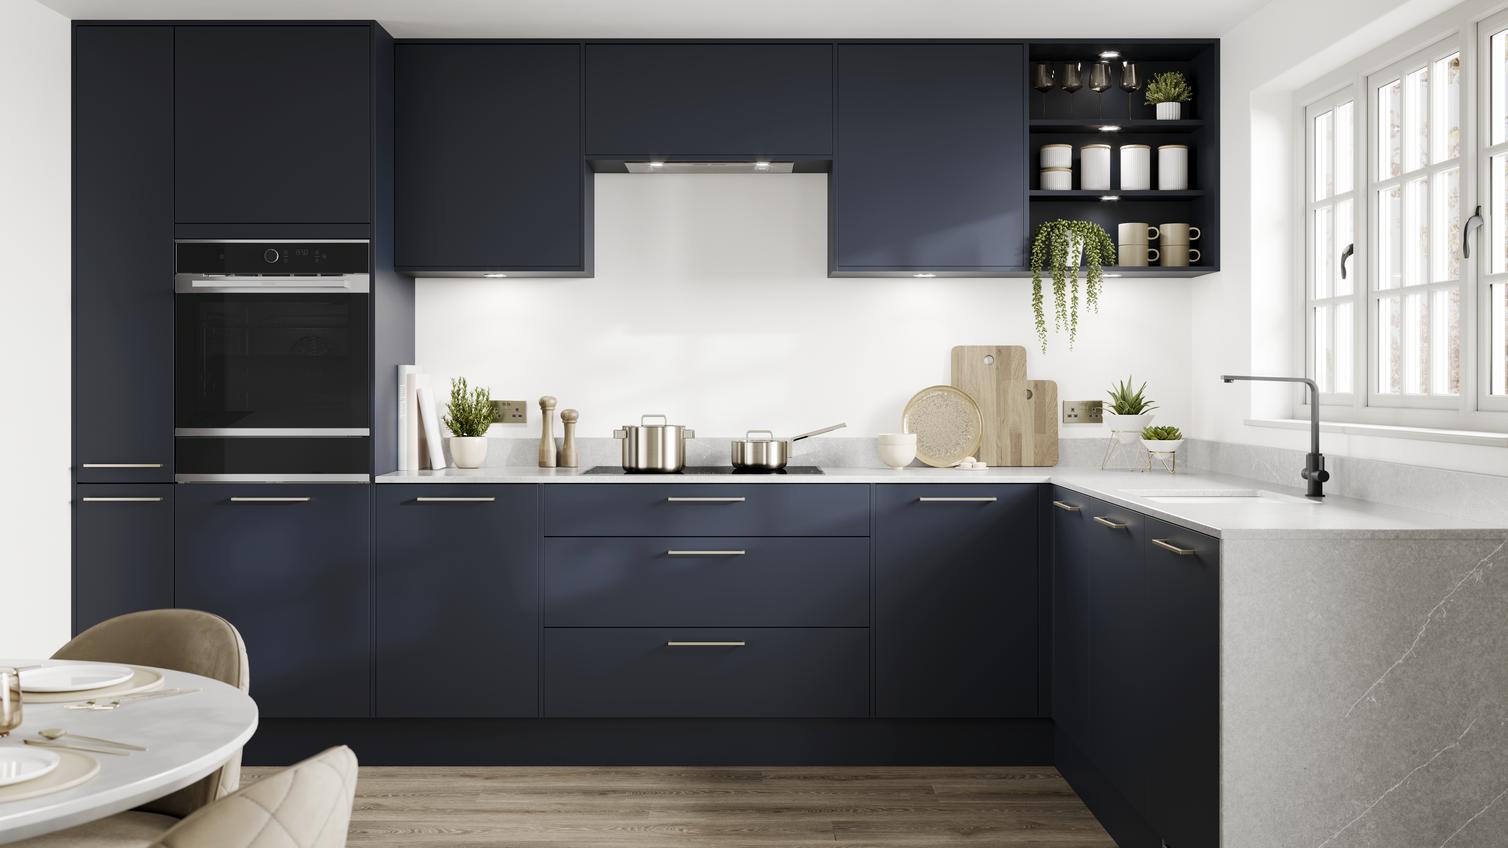 Contemporary blue kitchen idea with super-matt slab doors in a L-shaped layout. Has white marble worktops and brass handles.